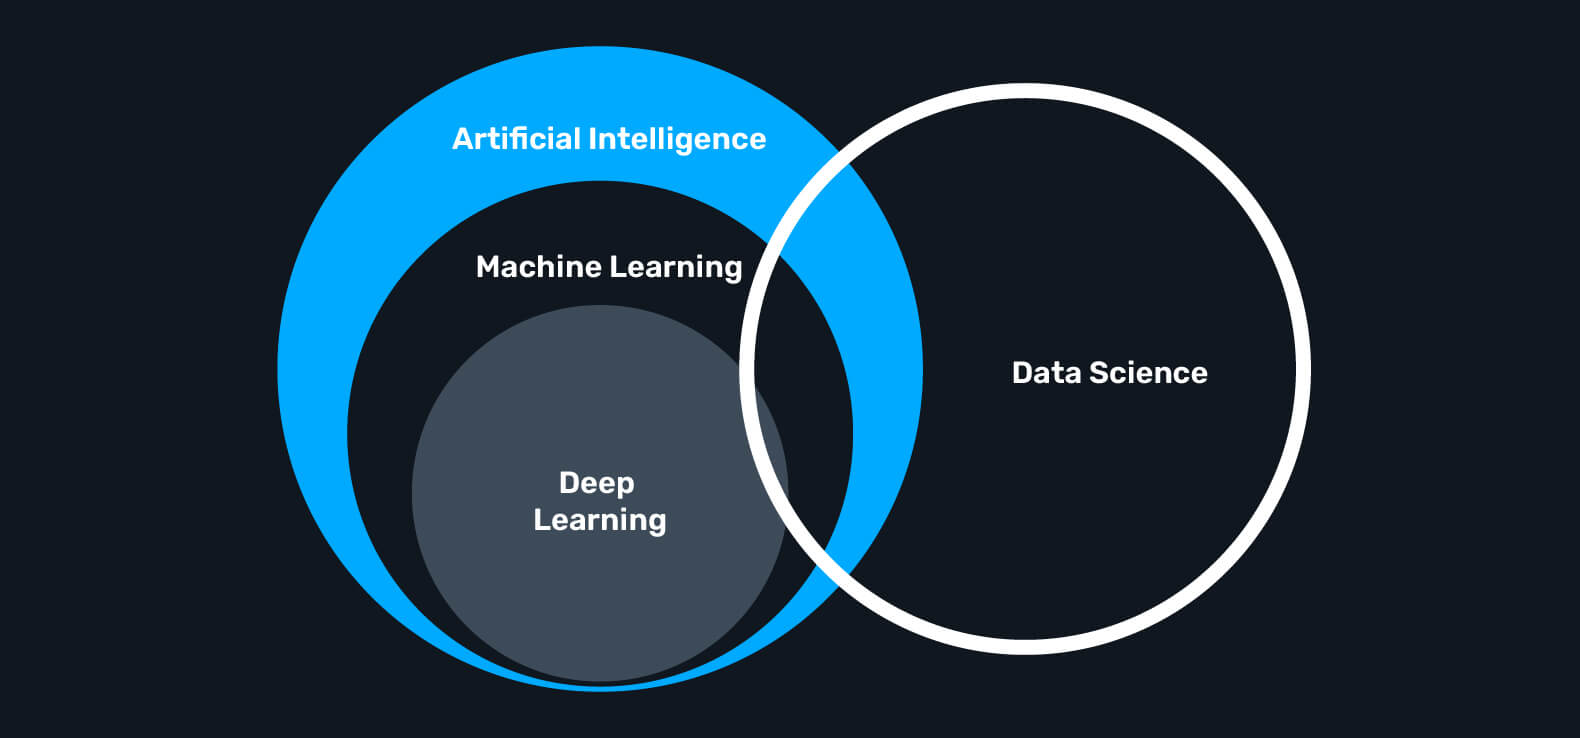 Machine Learning & Artificial Intelligence